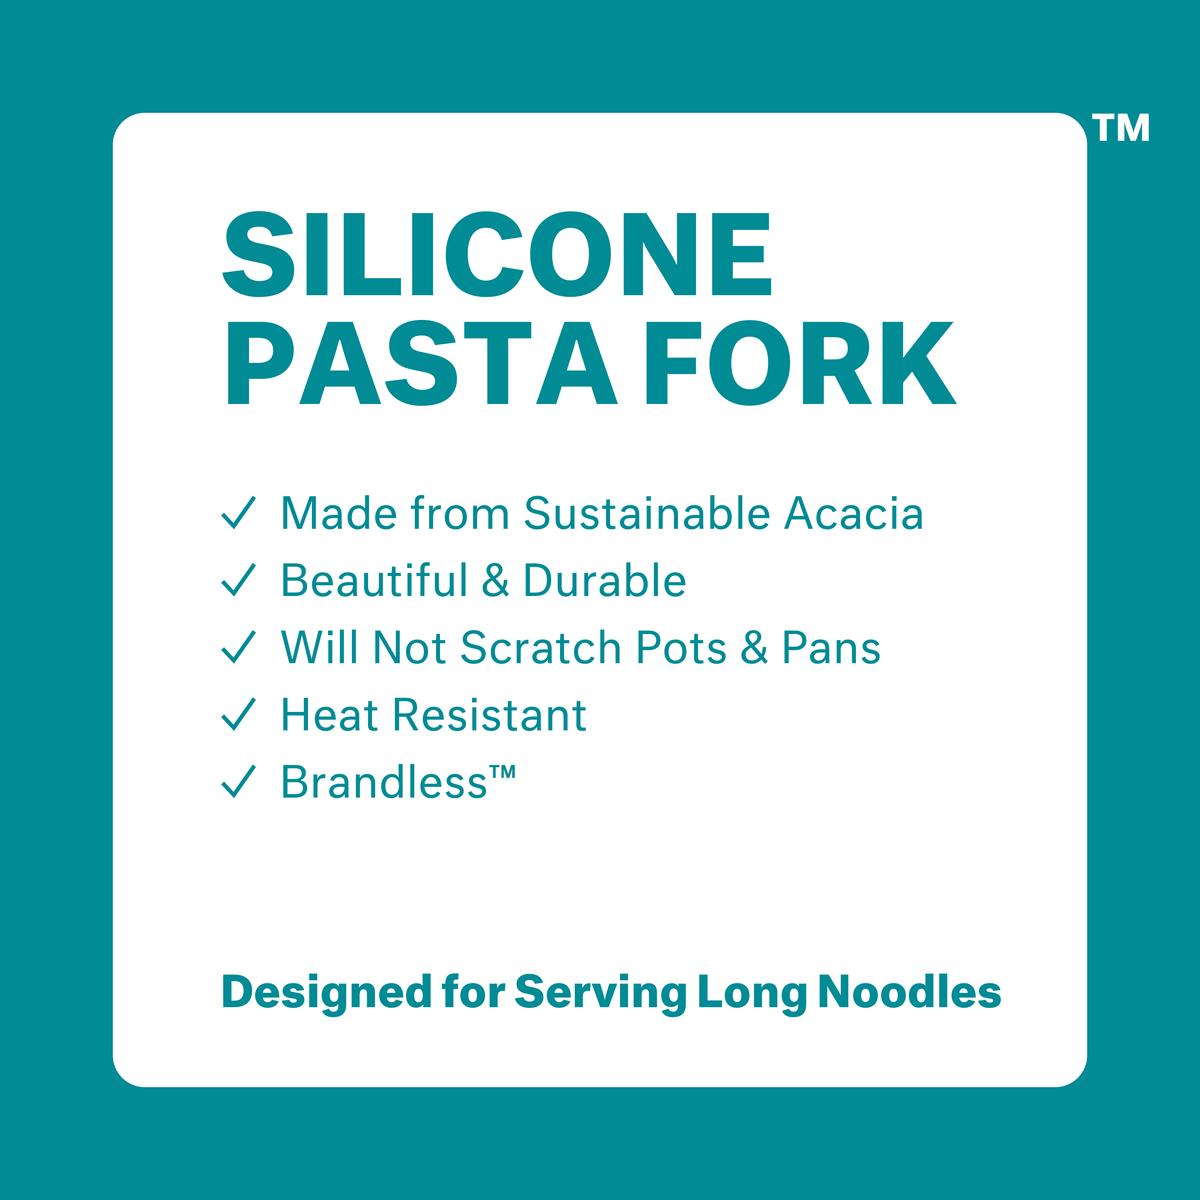 Silicone pasta fork: made from sustainable acacia, beautiul &amp; durable, will not scratch pots &amp; pans, heat resistant, brandless. Designed for serving long noodles.